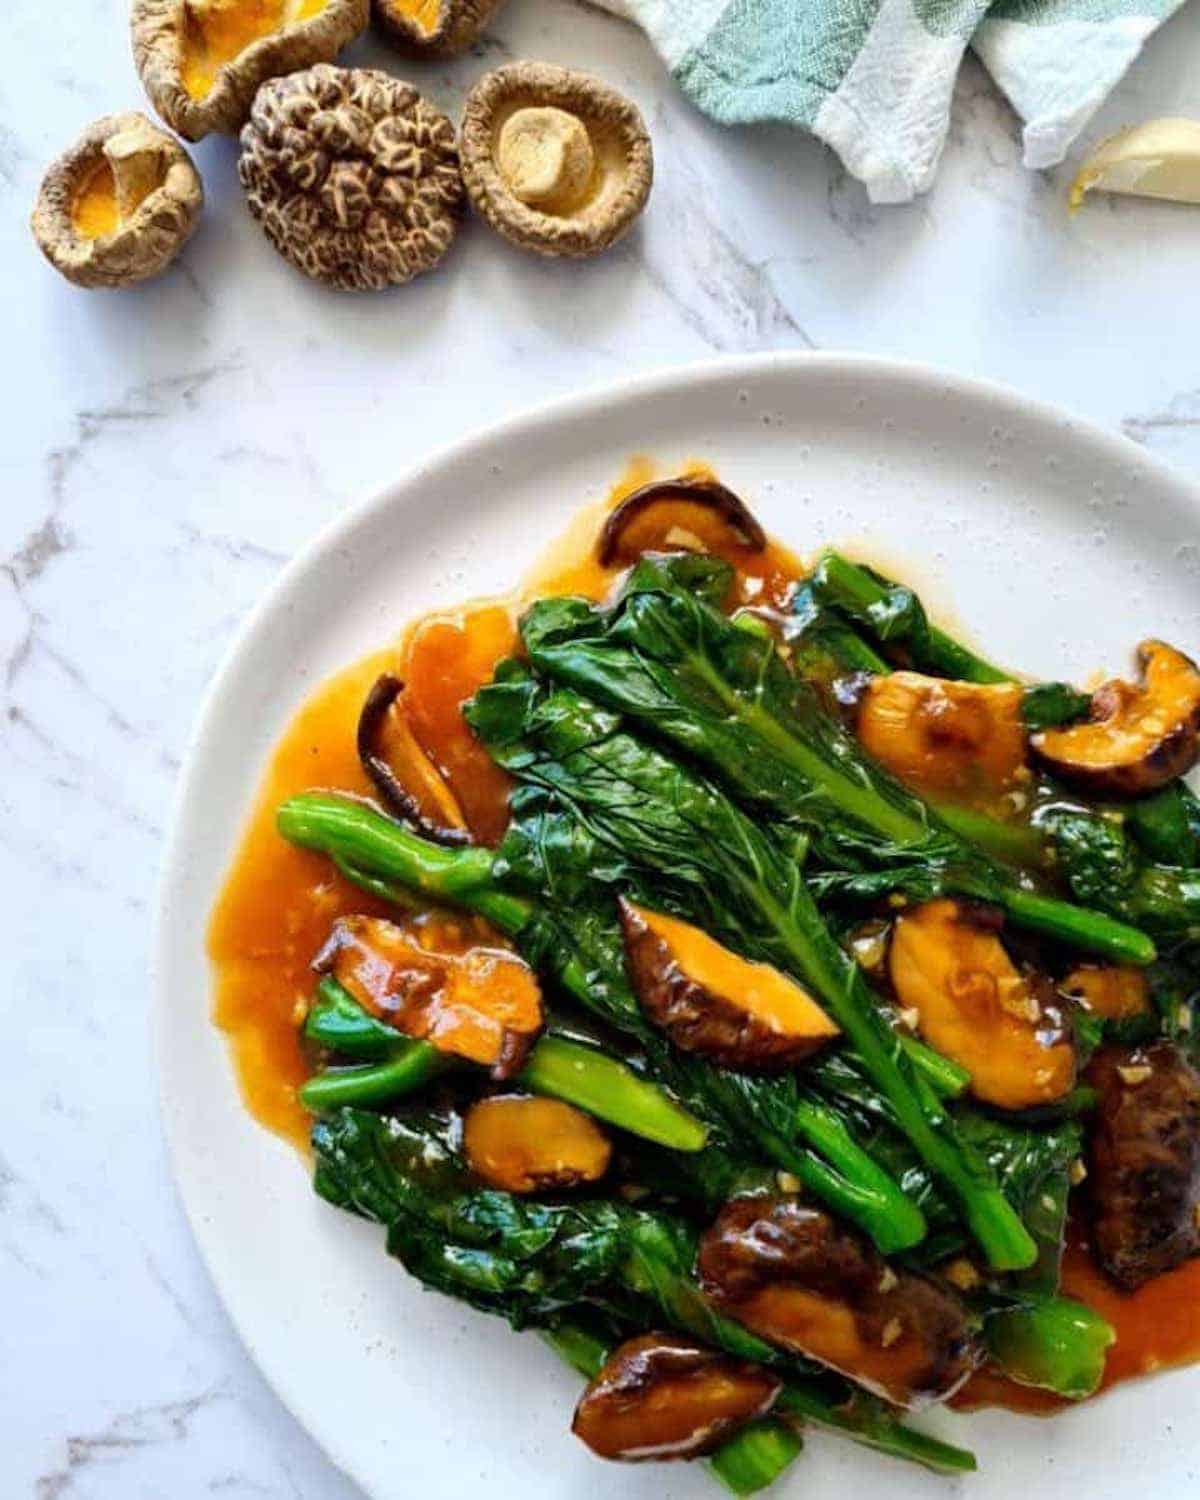 Chinese broccoli & mushrooms on a white plate.